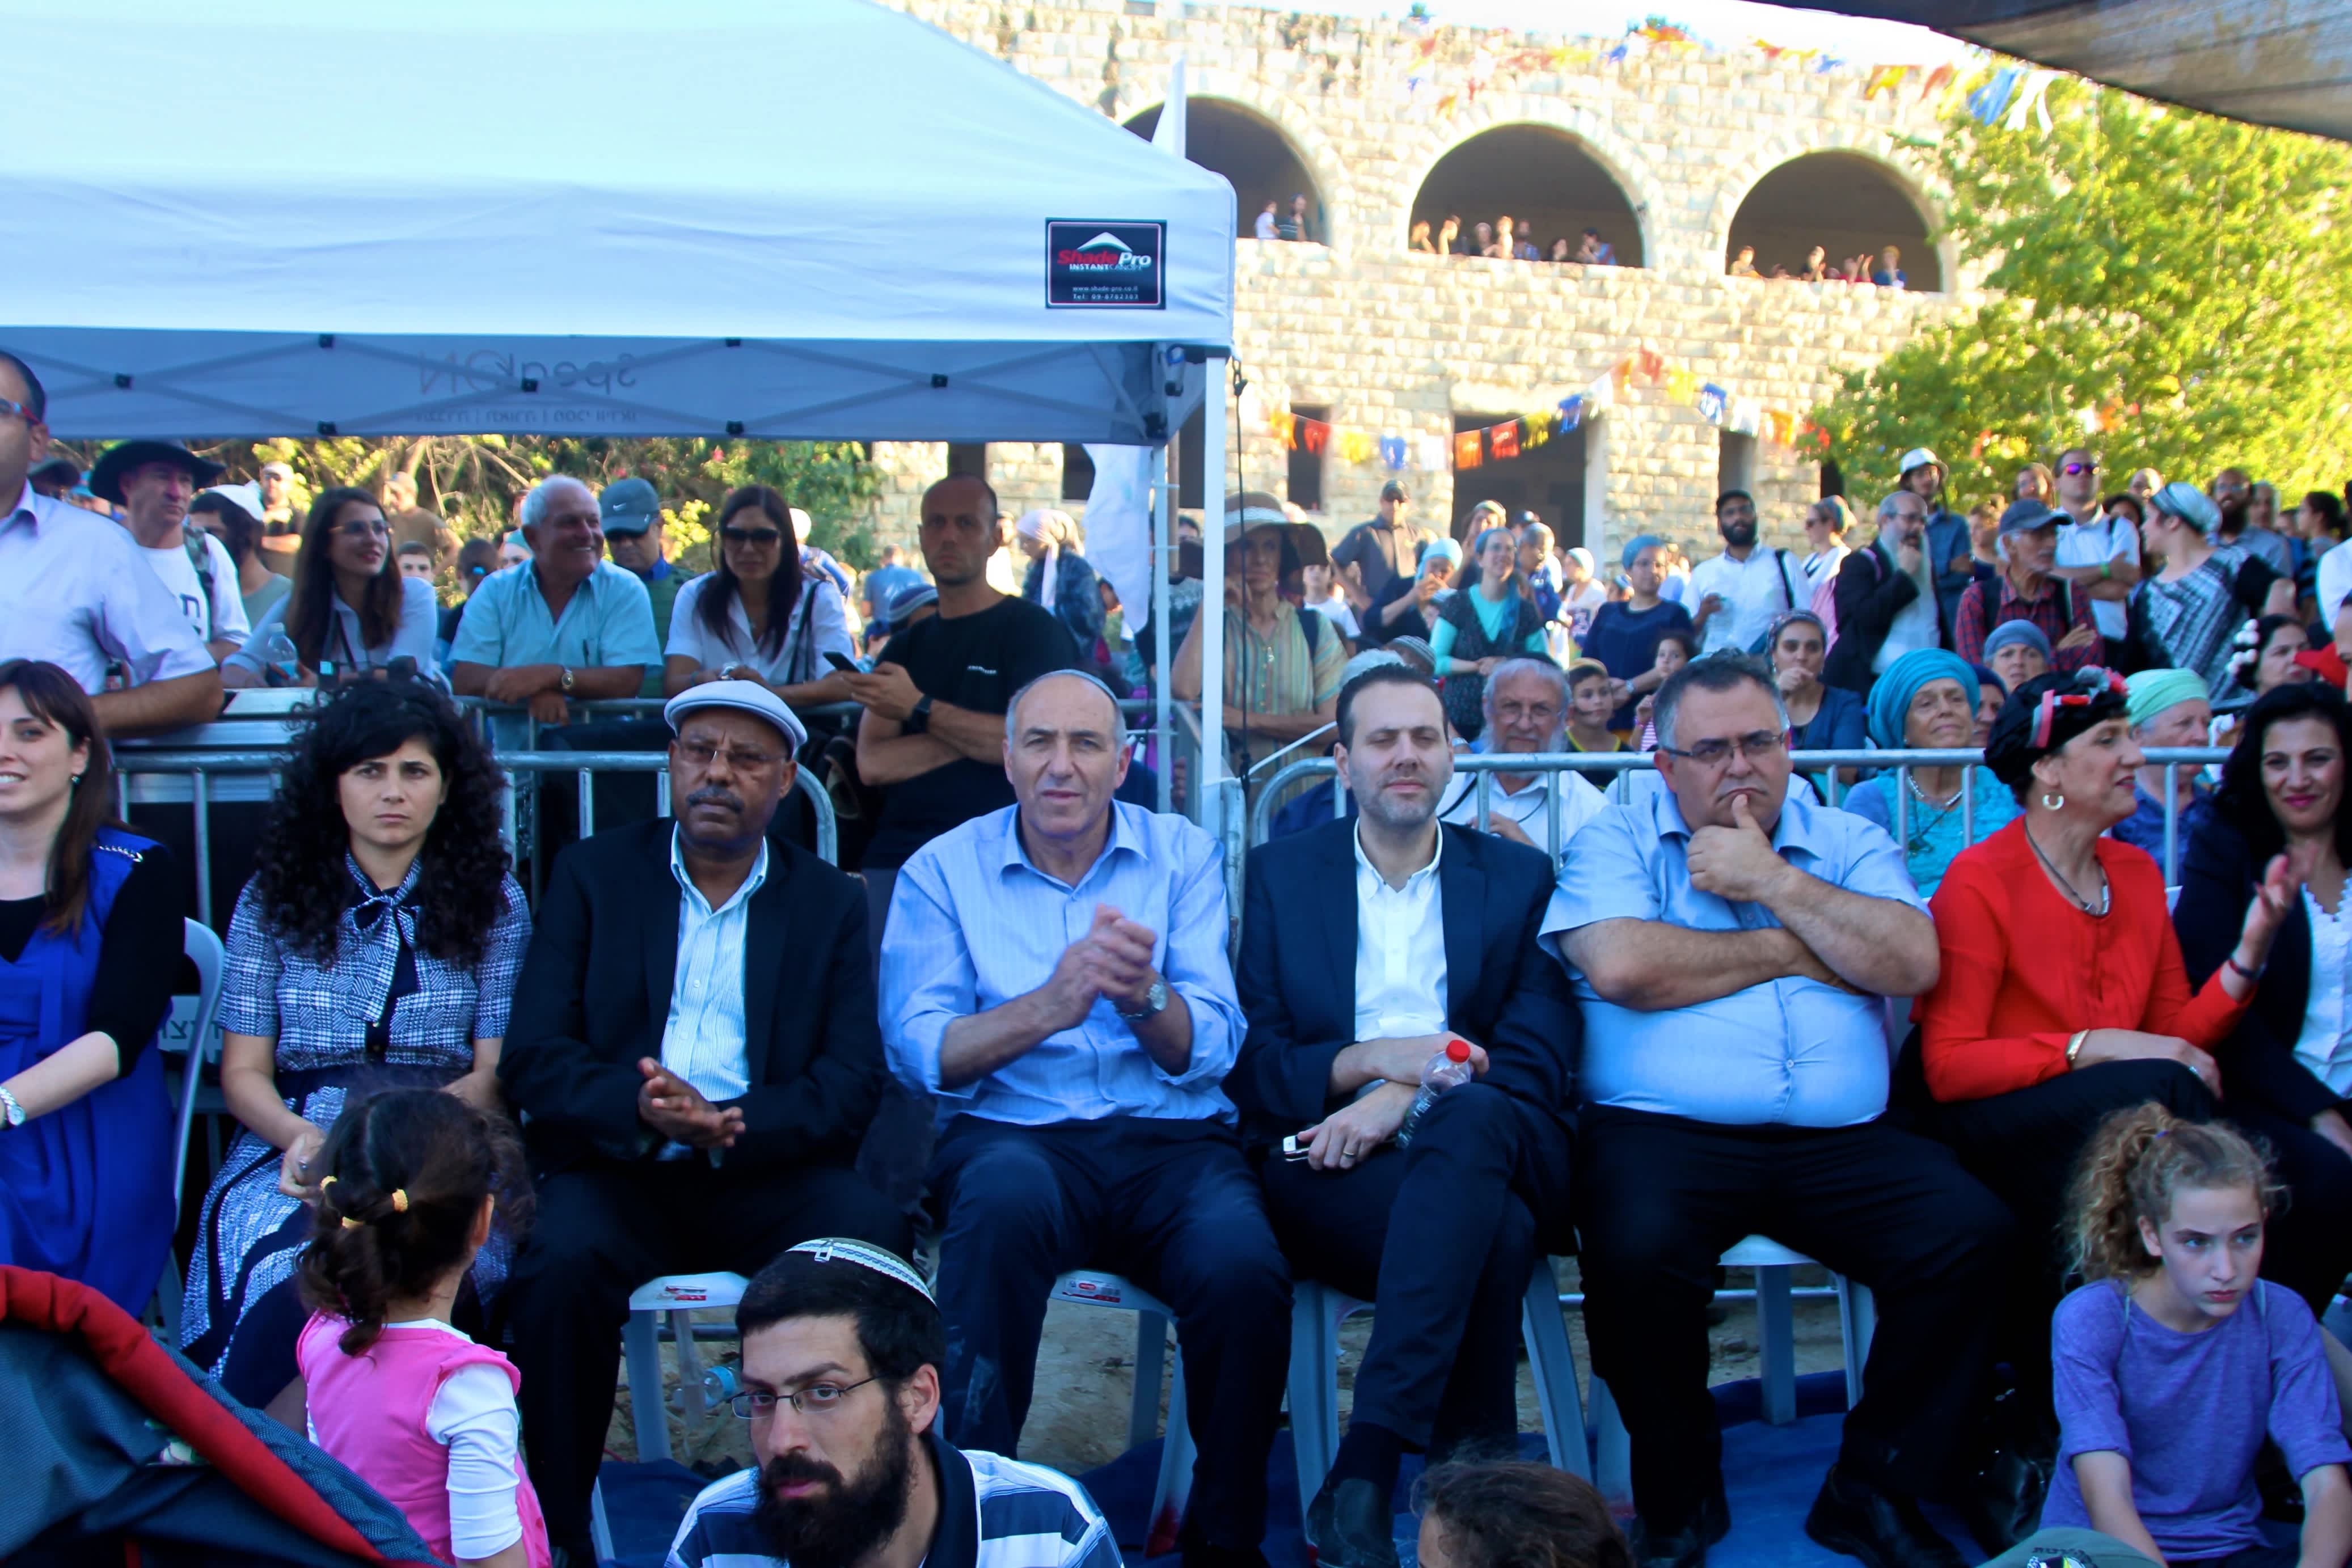  Parliamentarians at the protest rally at the site of the former Sa-Nur settlement in Samaria (credit: Tovah Lazaroff)